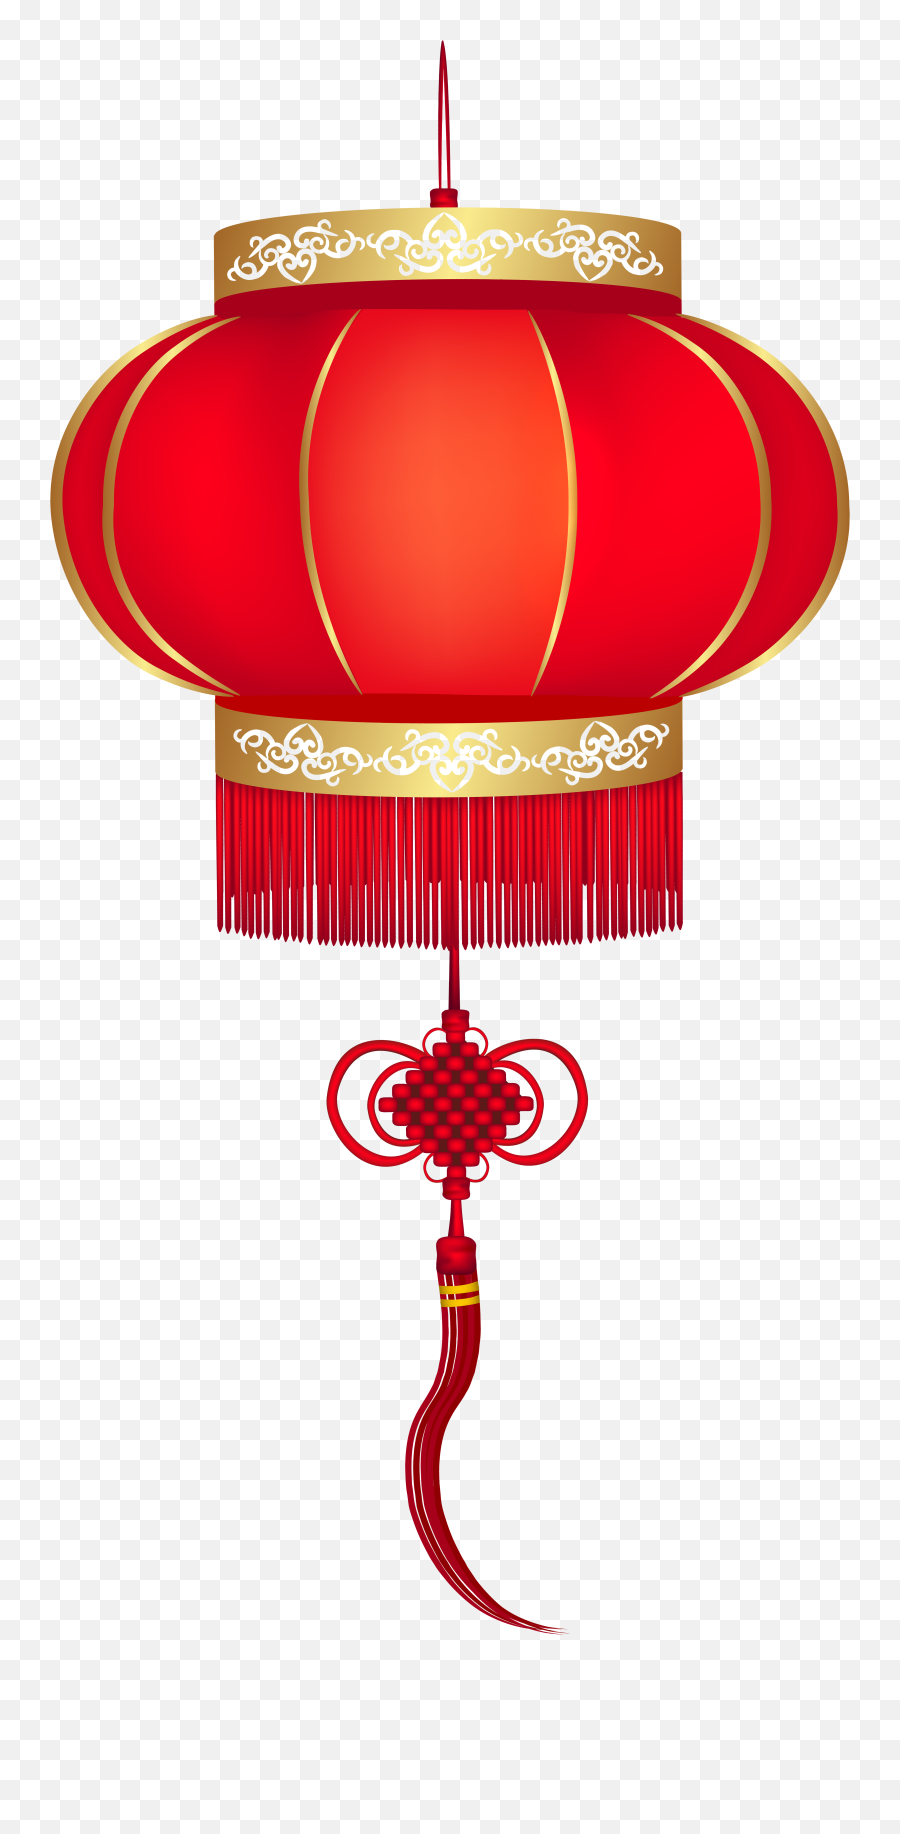 Download Free Png Chinese - Dlpngcom Chinese Red Lantern Png,Red Design Png